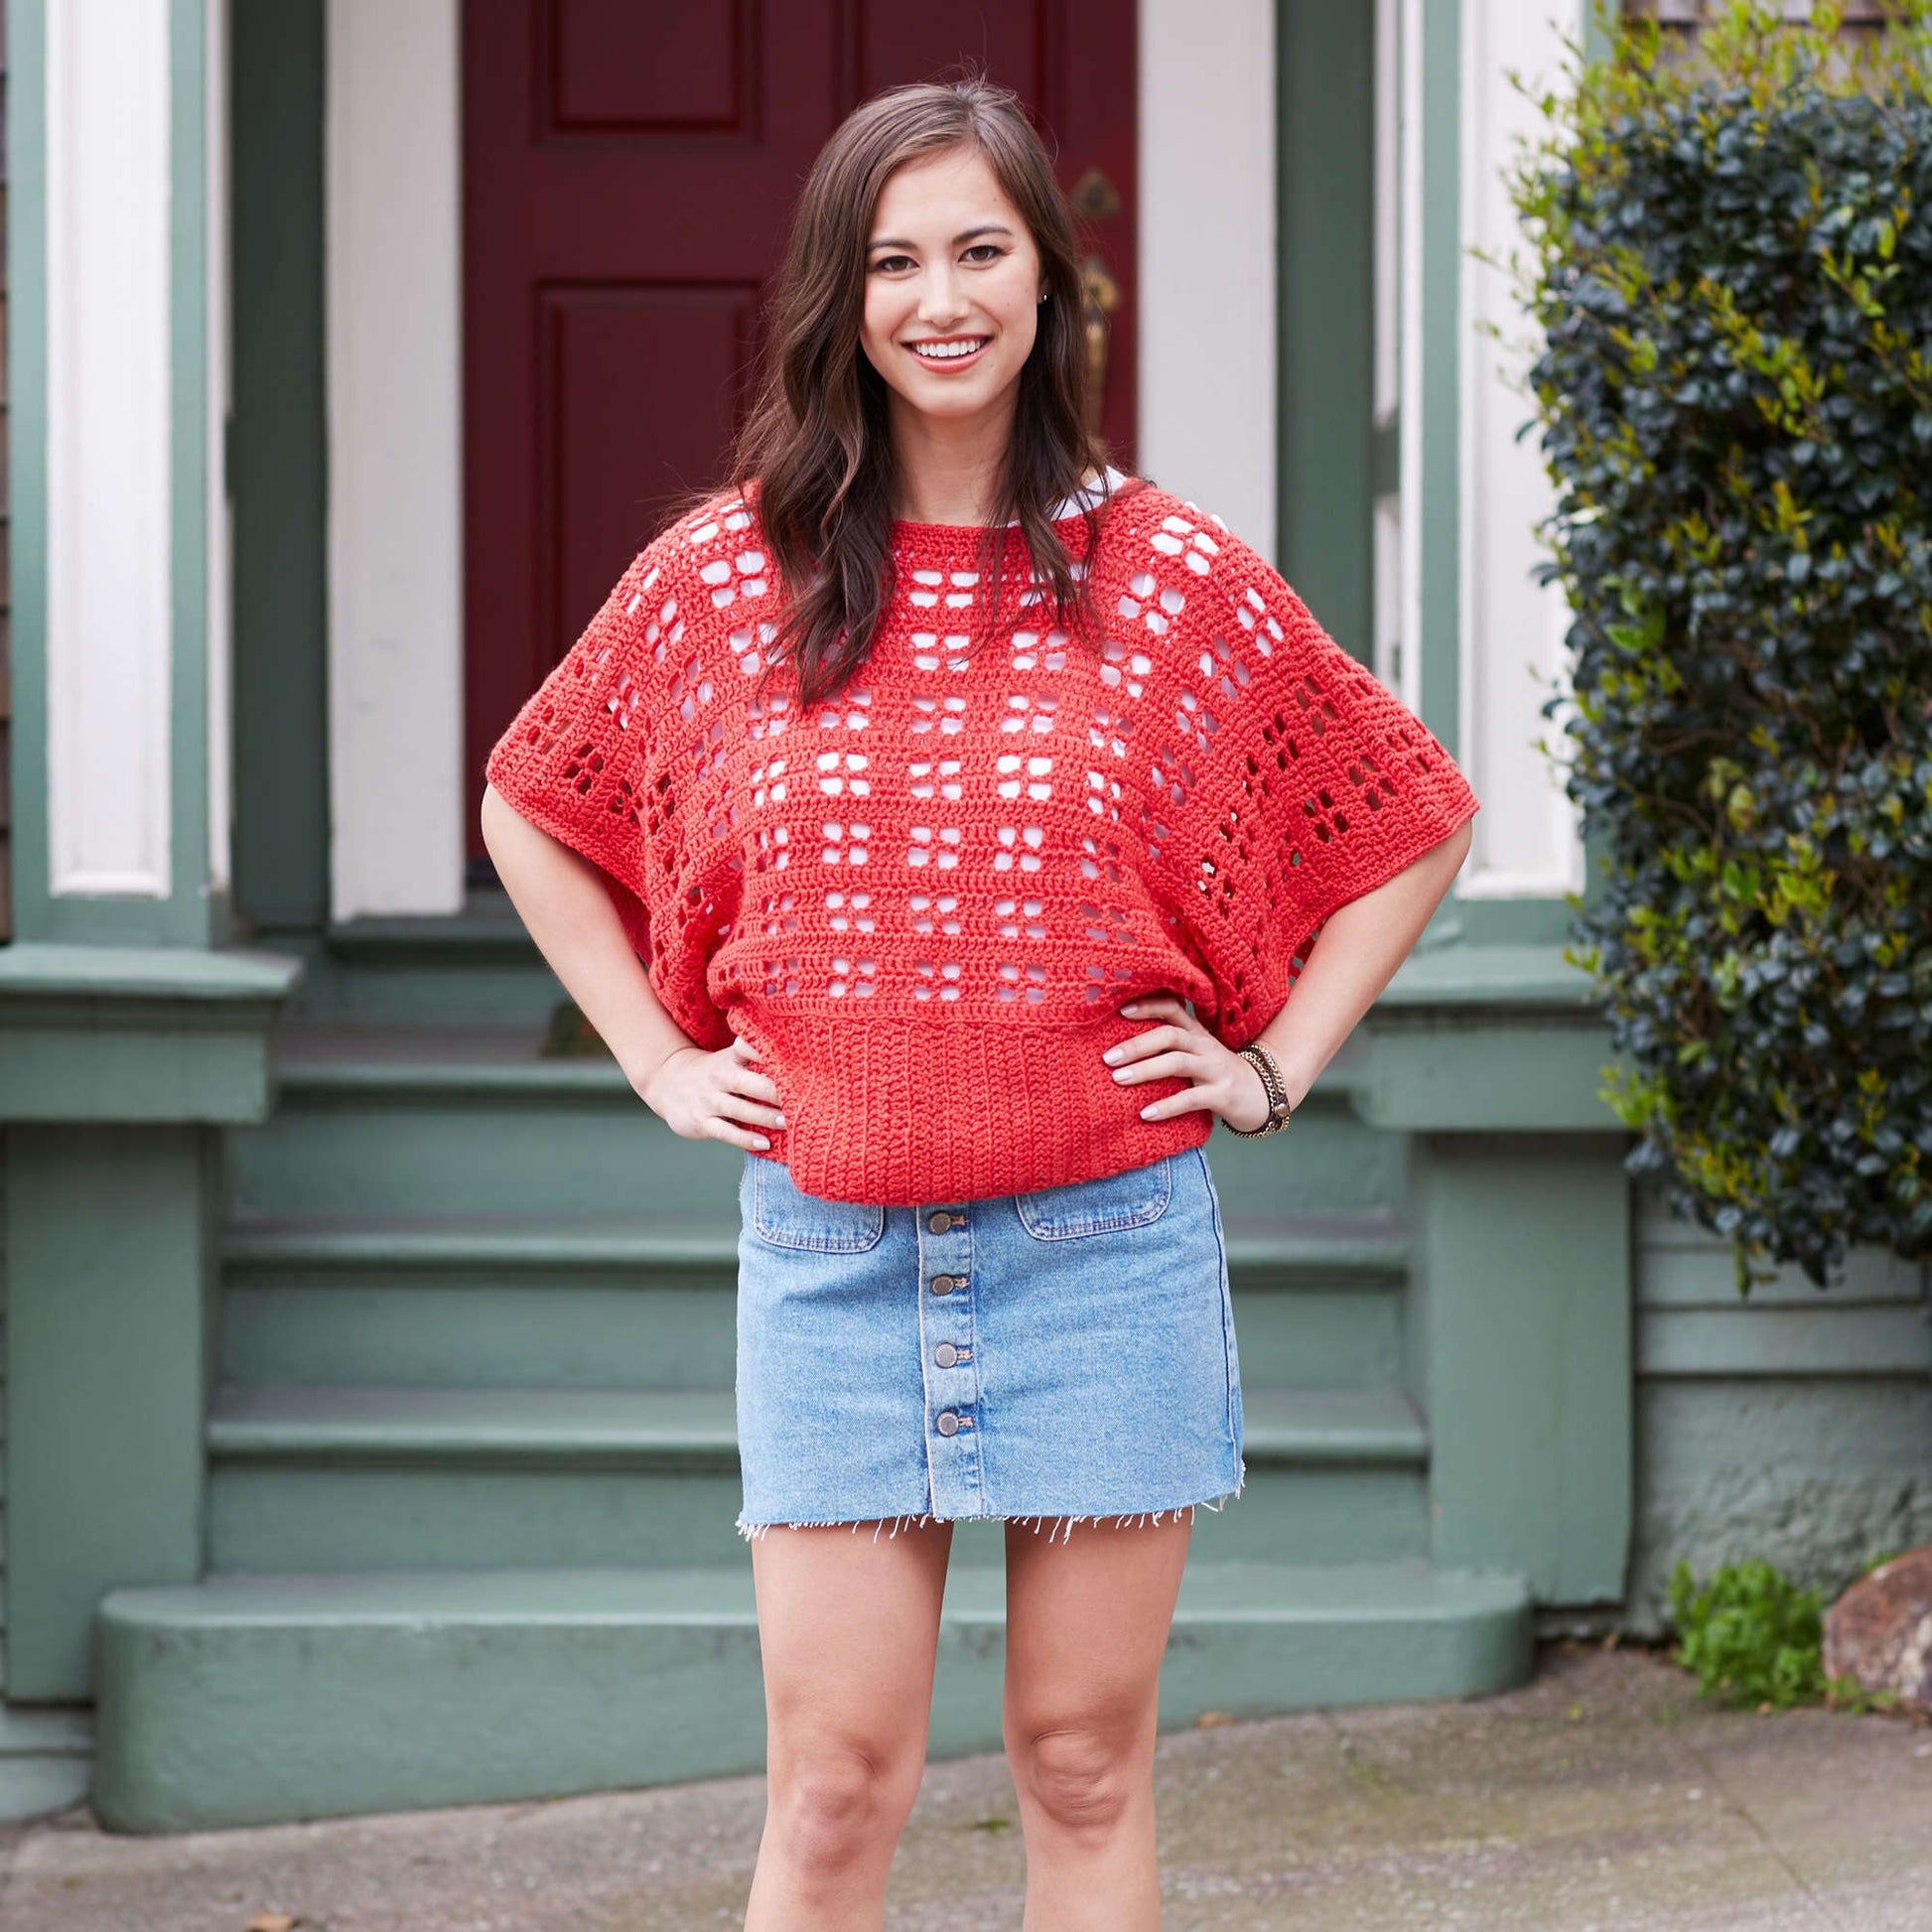 Free Red Heart Crochet Clementine Chic Sweater Pattern